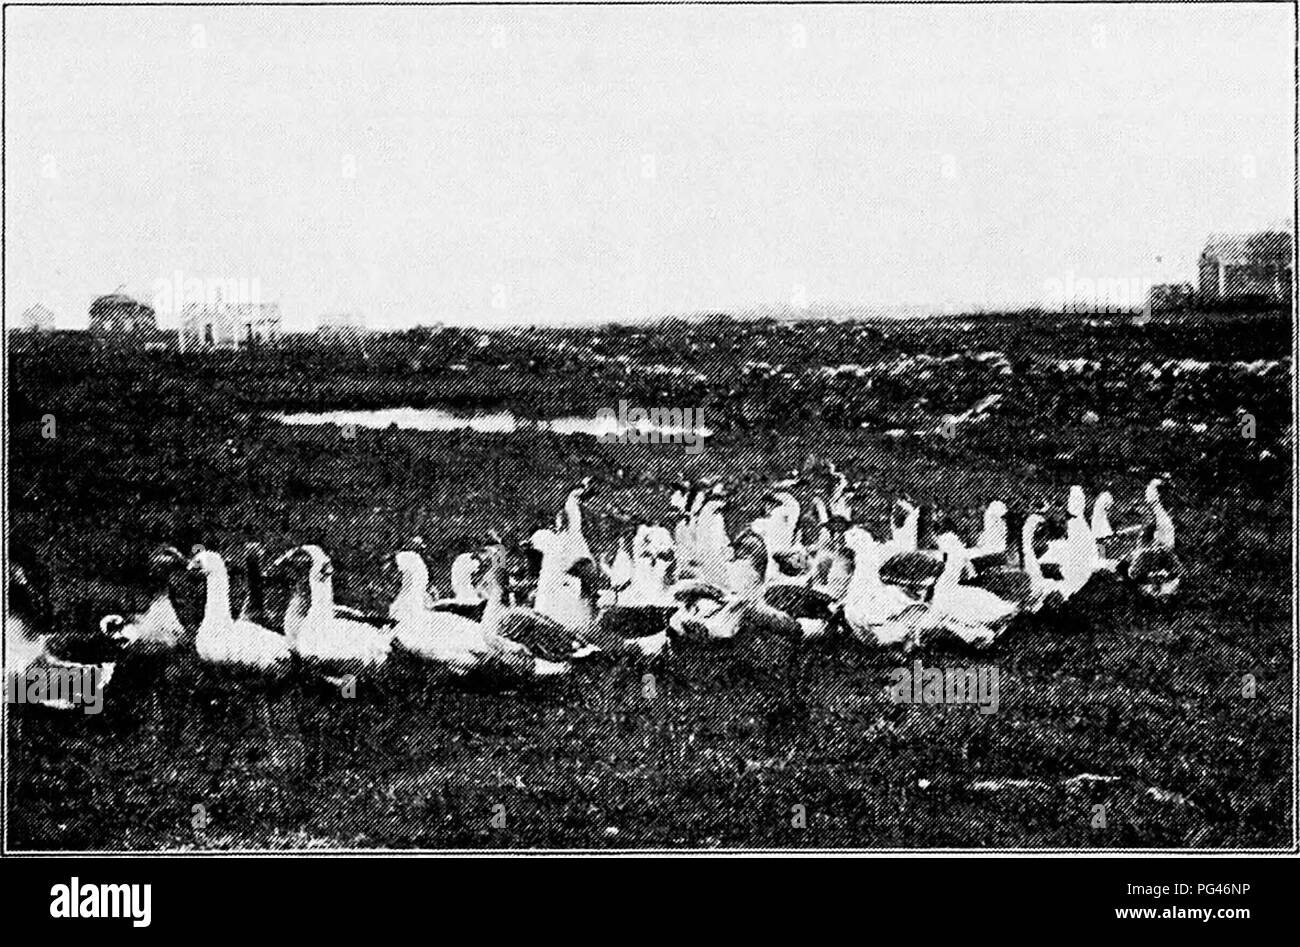 . Principles and practice of poultry culture . Poultry. ECONOMIC ASPECTS OF POULTRY CULTURE 55 notably in Rhode Island and parts of southeastern Massachusetts, the growing of &quot;' green &quot; geese, to be marketed at about twelve weeks of age, is extensively carried on, almost every farm in a community growing geese, and the number of goslings grown on a farm sometimes reaching four or five hundred, though the average is perhaps less than half as many. The colony egg-farming district of Rhode Island is perhaps the most important goose-growing district in the United States. Goslings are usu Stock Photo